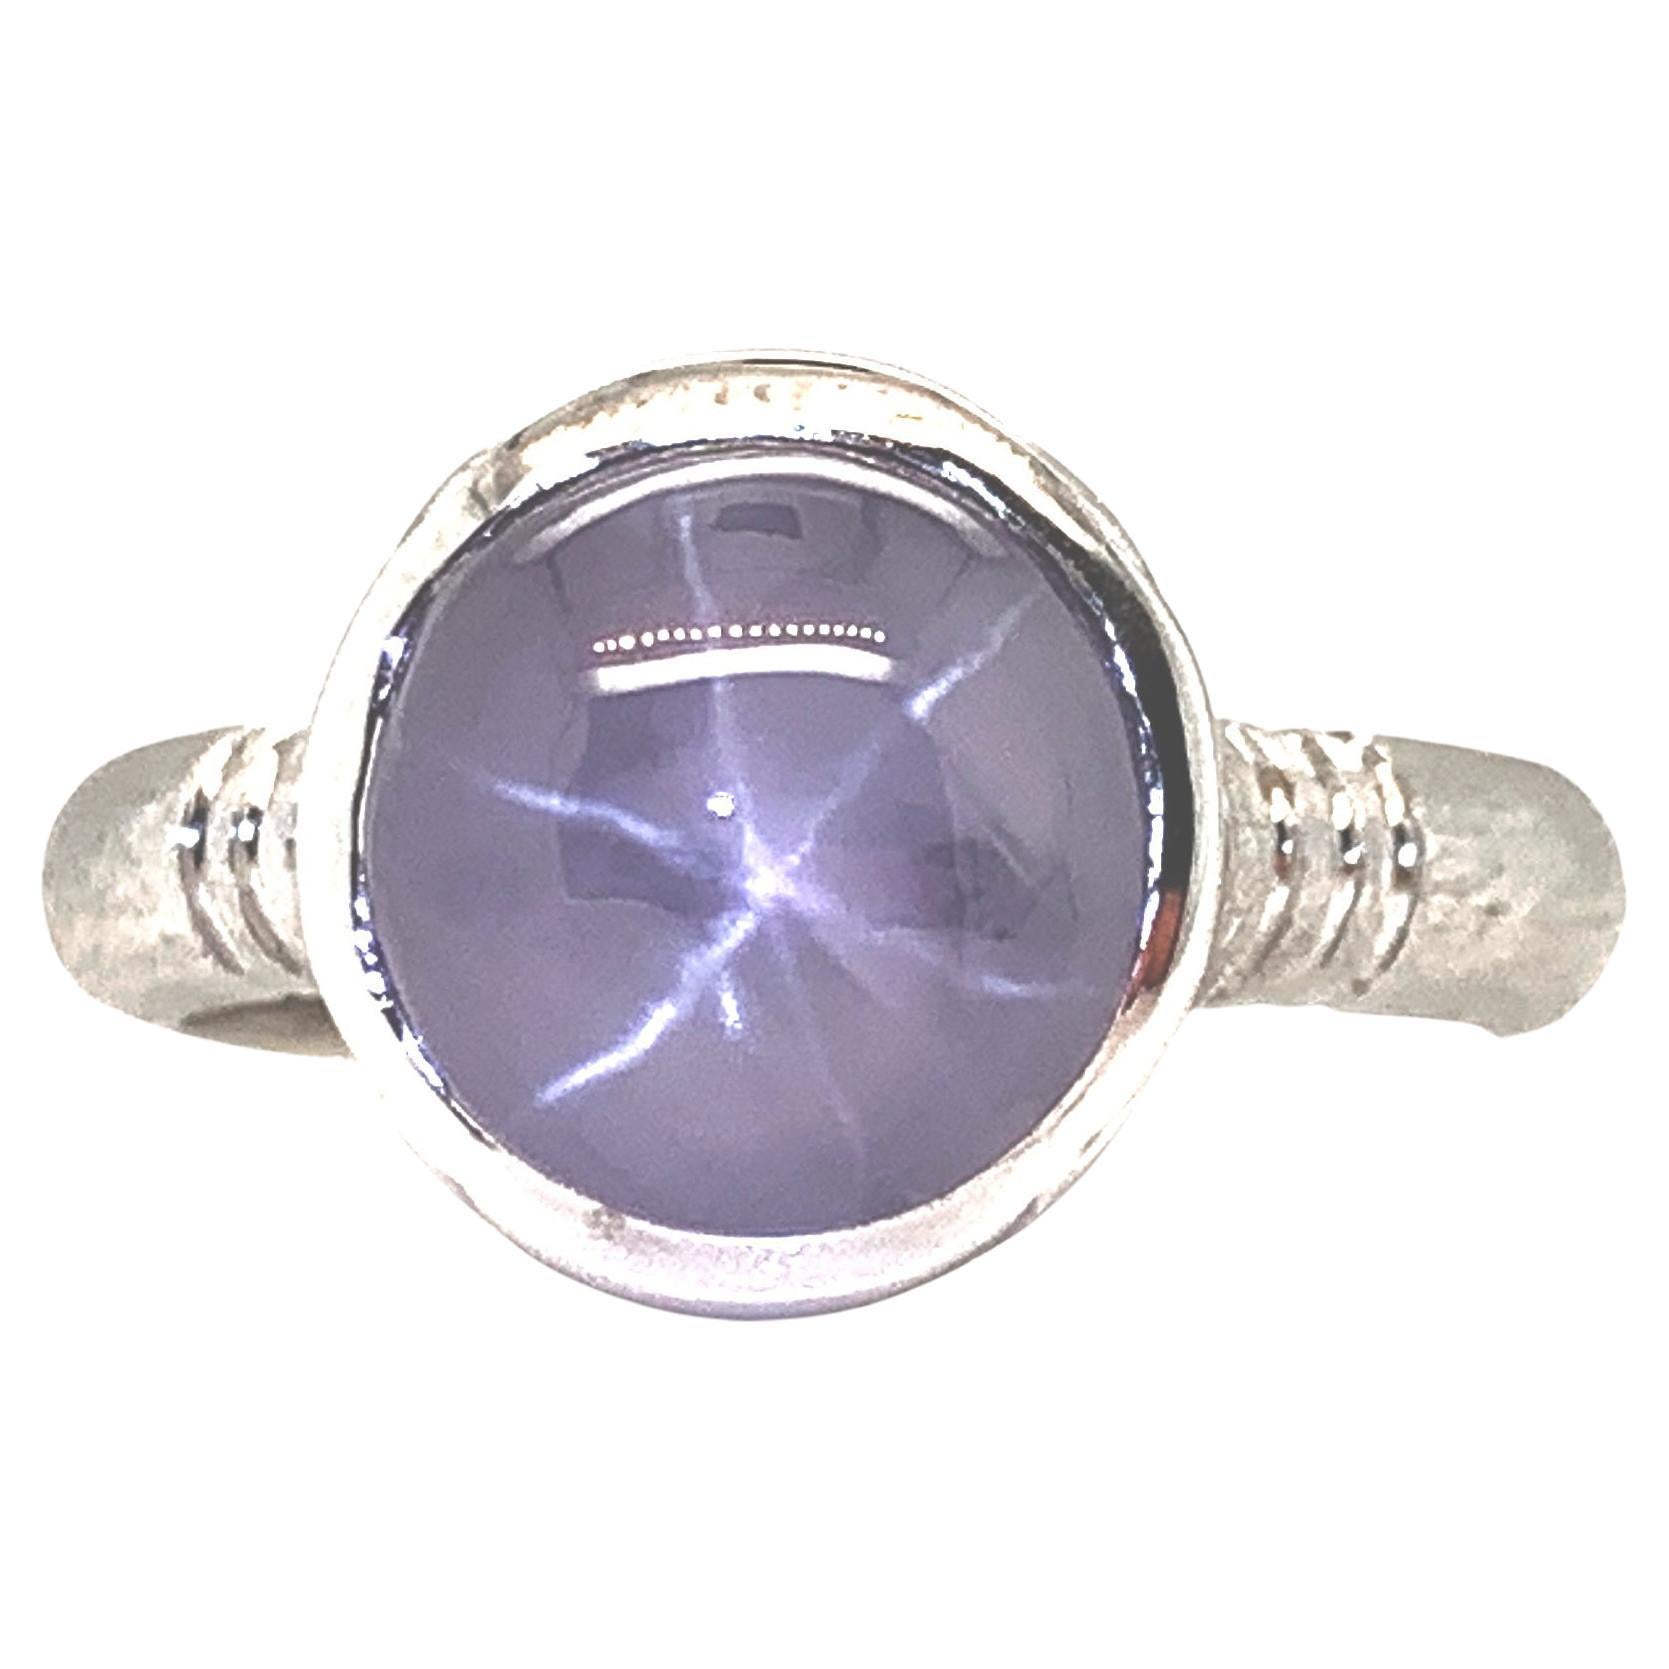 This eye-catching ring features a large, 6.36 carat oval silvery blue star sapphire cabochon set in an 18k white gold bezel. One of the most highly-prized phenomenal gemstones, this sapphire displays a 6-rayed star when viewed from a concentrated